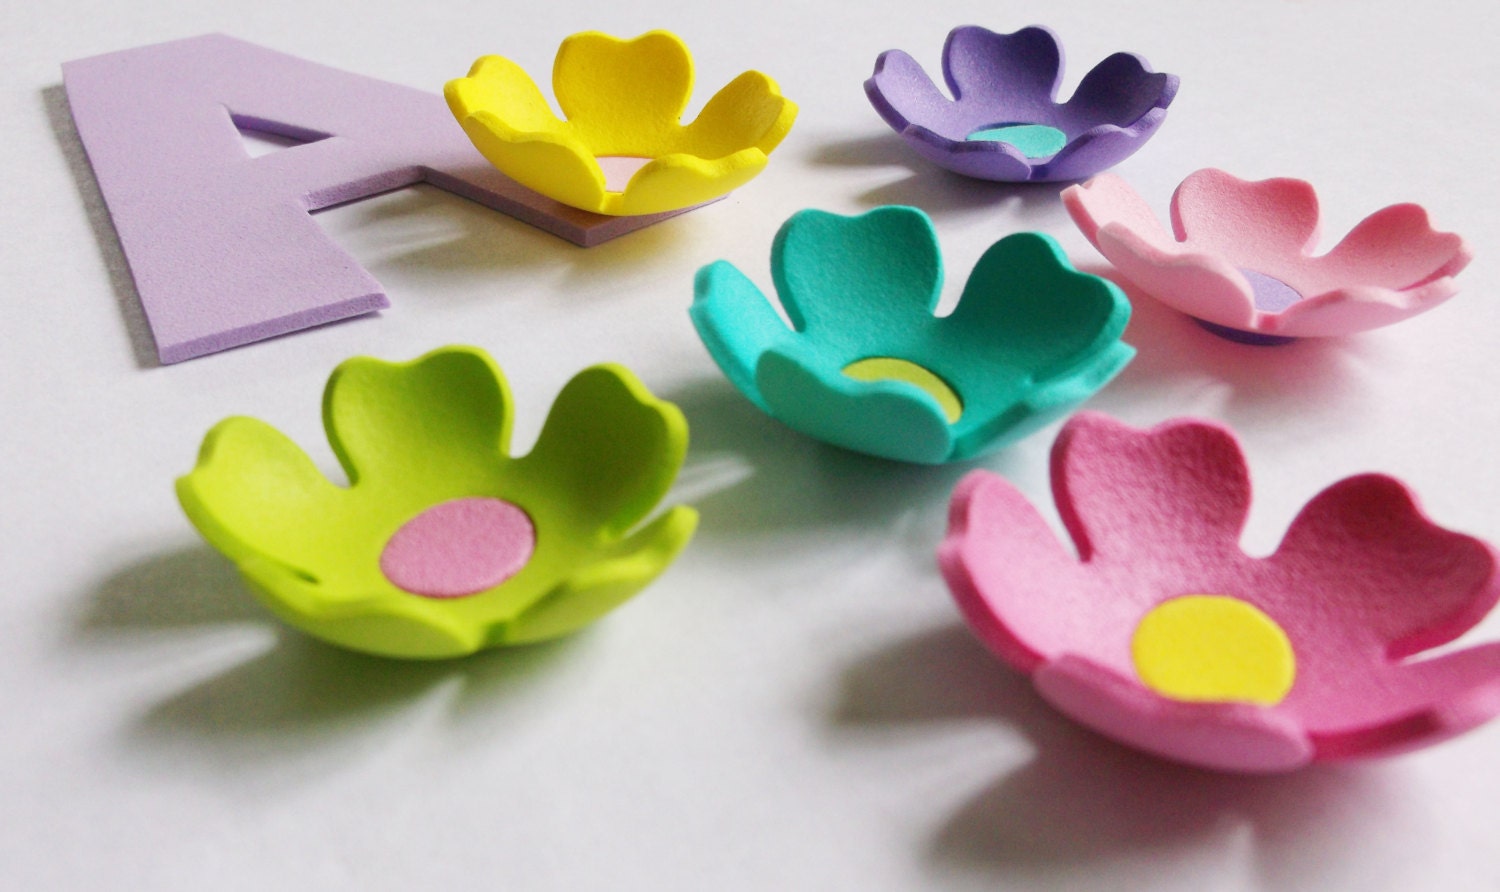 7 3d Foam Flowers Ideal for Foam Crafts, Fofuchas and More 